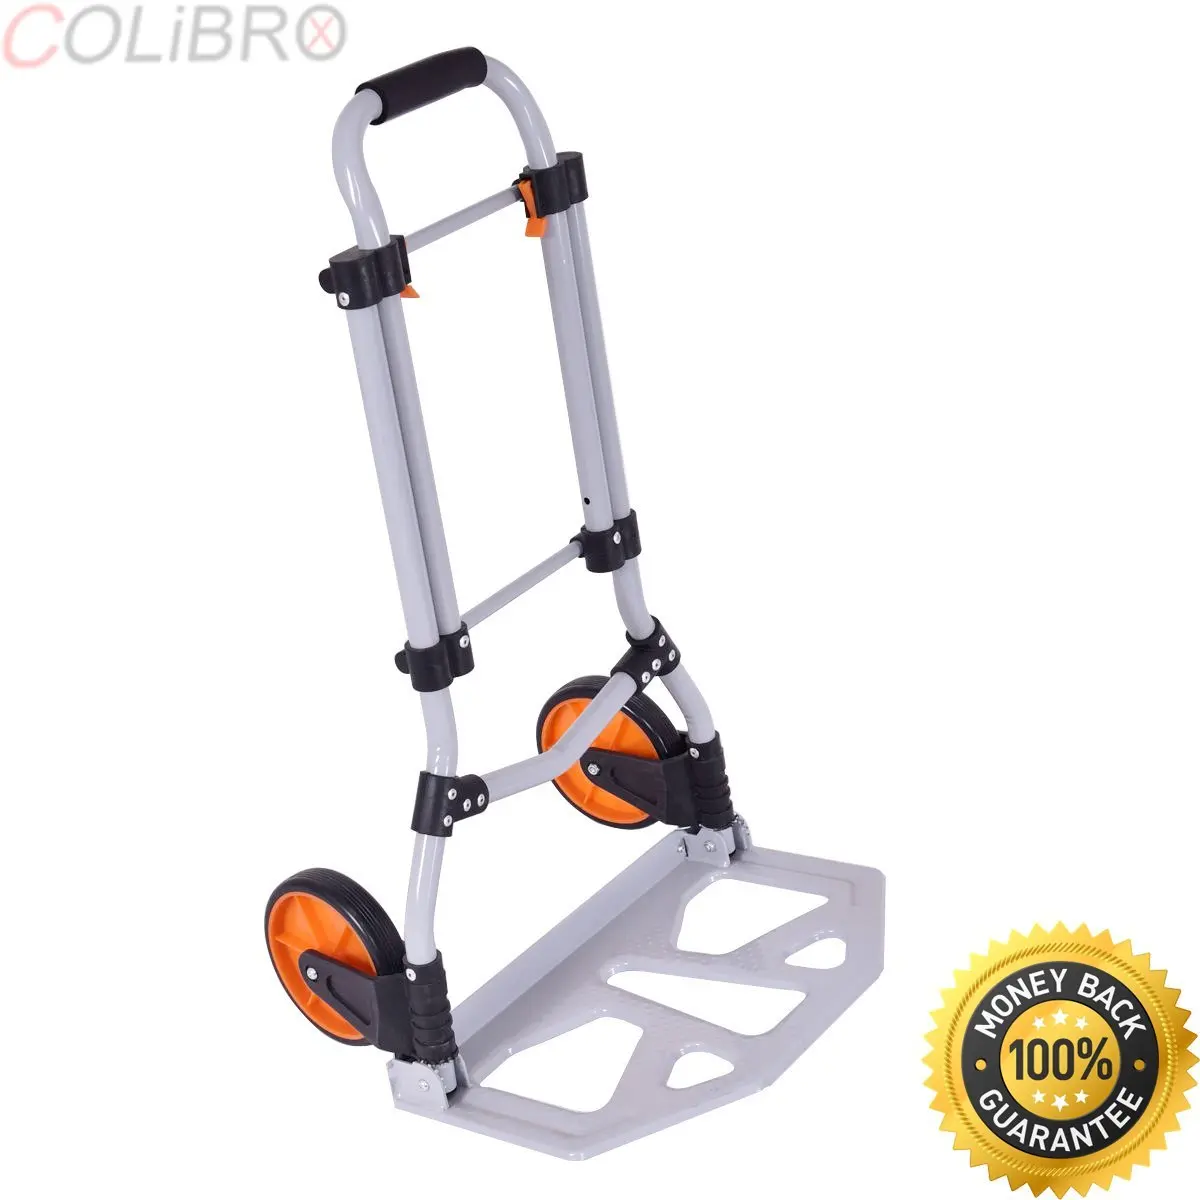 Cheap Folding Luggage Dolly, find Folding Luggage Dolly deals on line